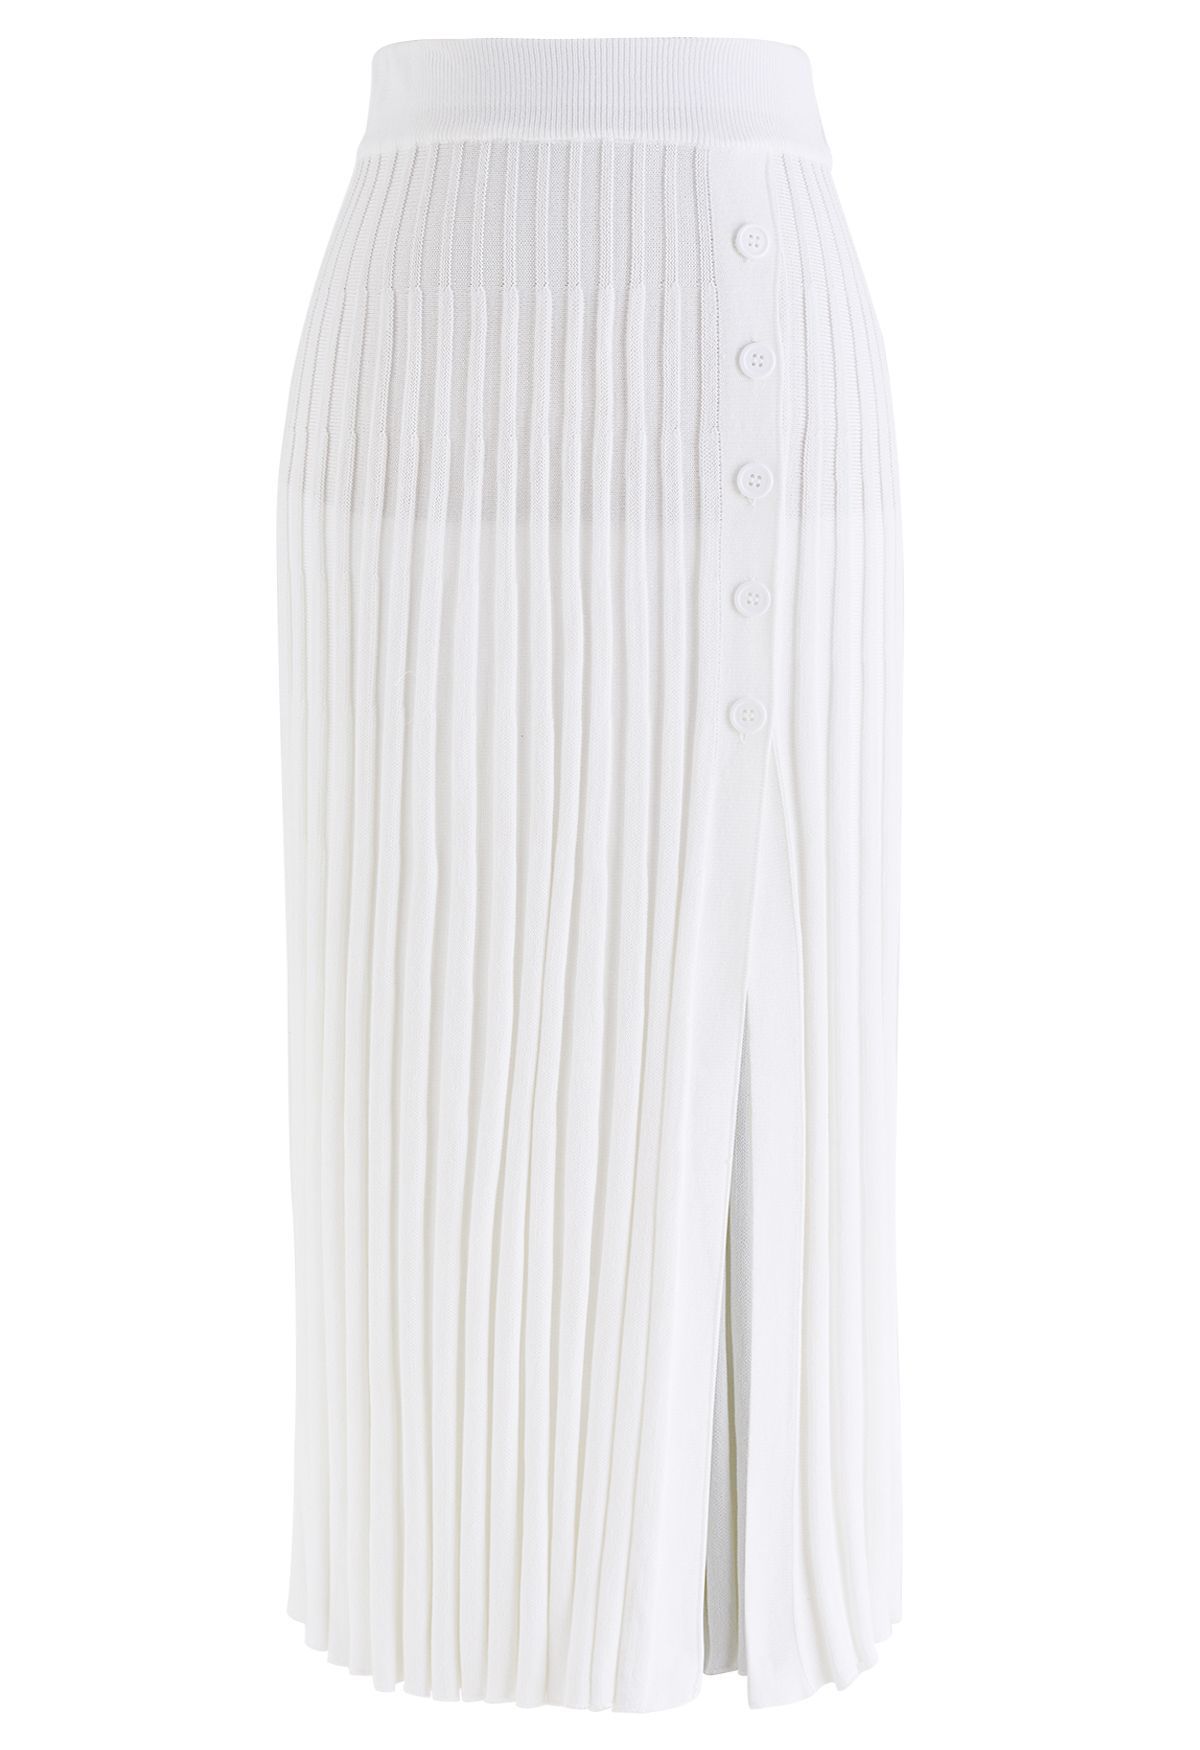 Buttoned Front Slit Rib Knit Skirt in White | Chicwish